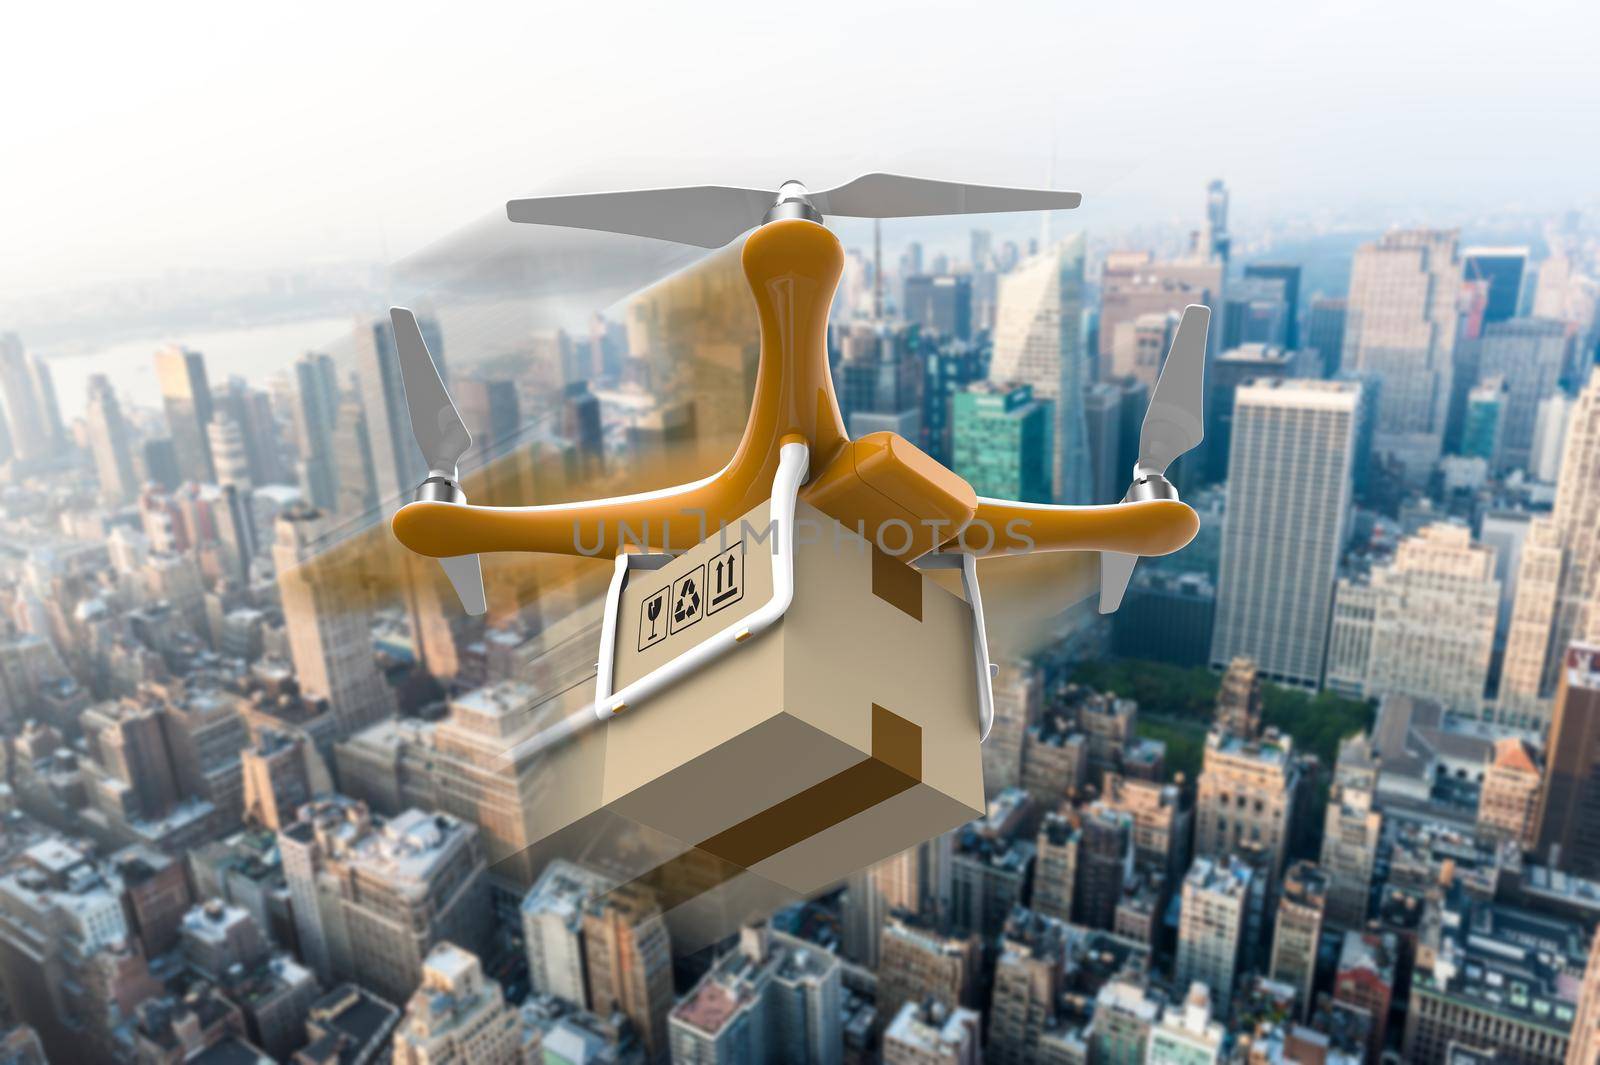 Drone with a delivery box package over a city by cla78